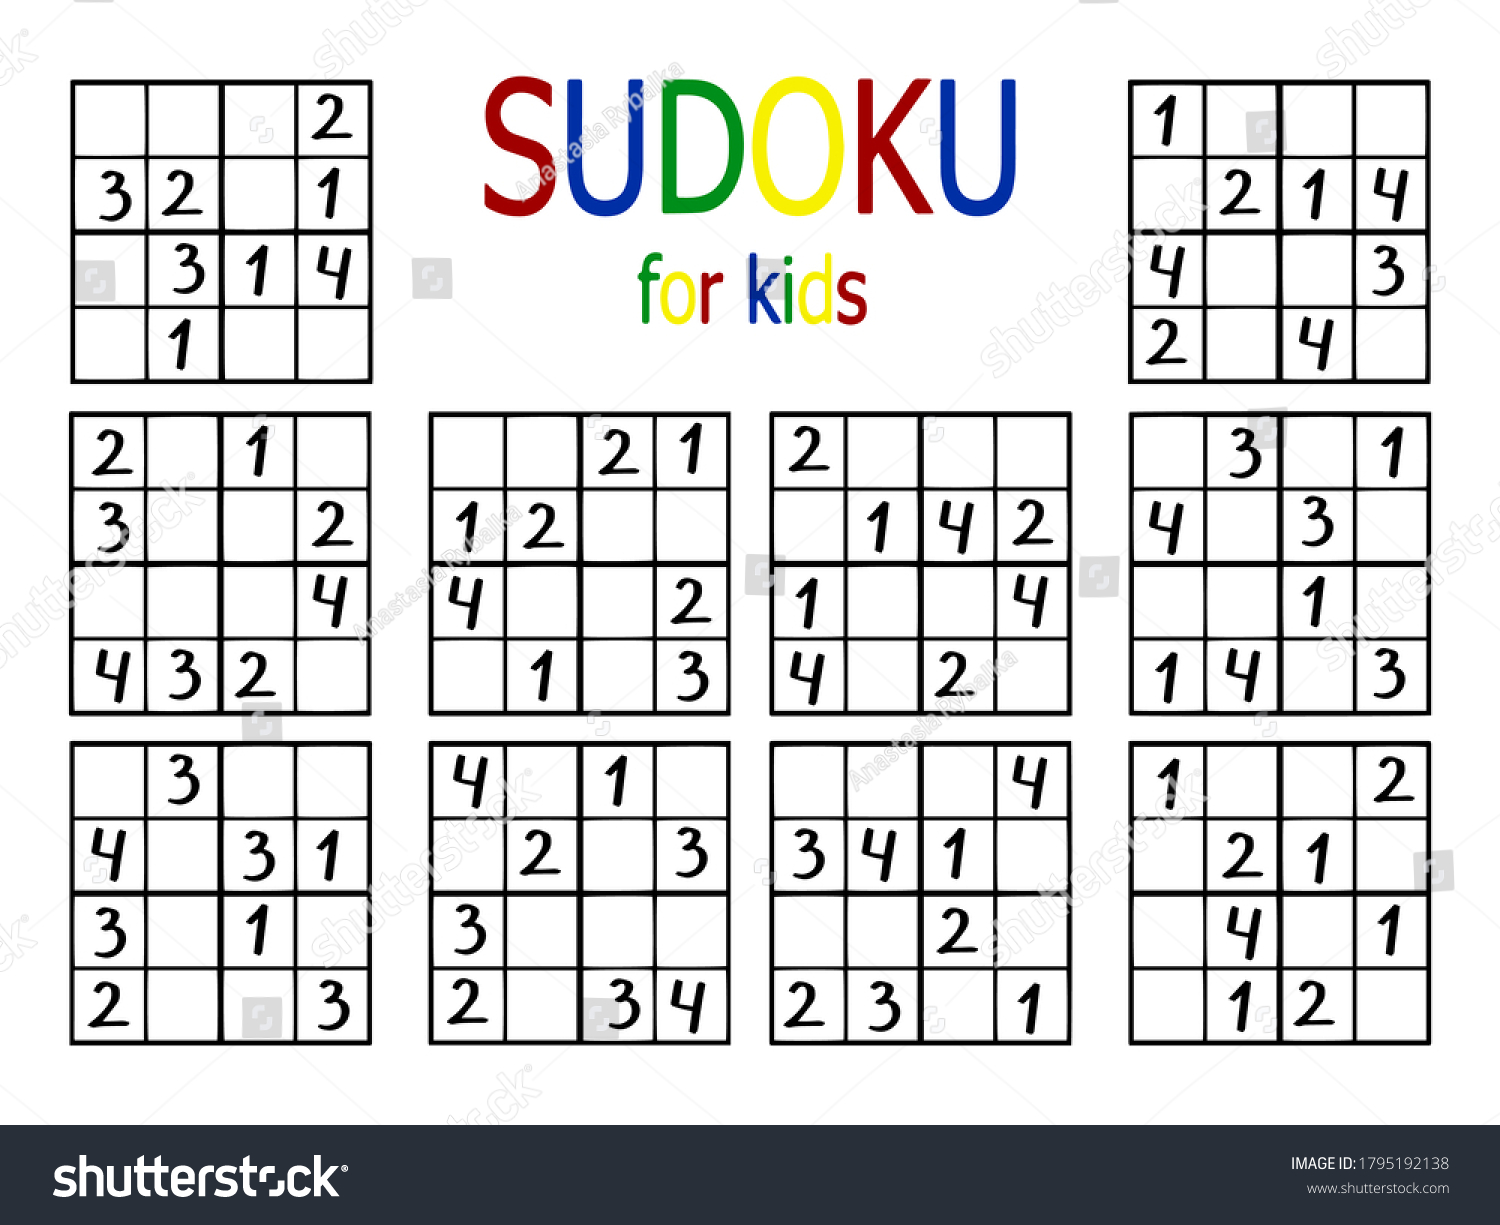 SVG of Number sudoku set for kids stock vector illustration. Ten easy sudoku game four by four for beinners. Simple number japanese logic puzzle for thinking. Complete all empty spaces number from 1 to 4. svg